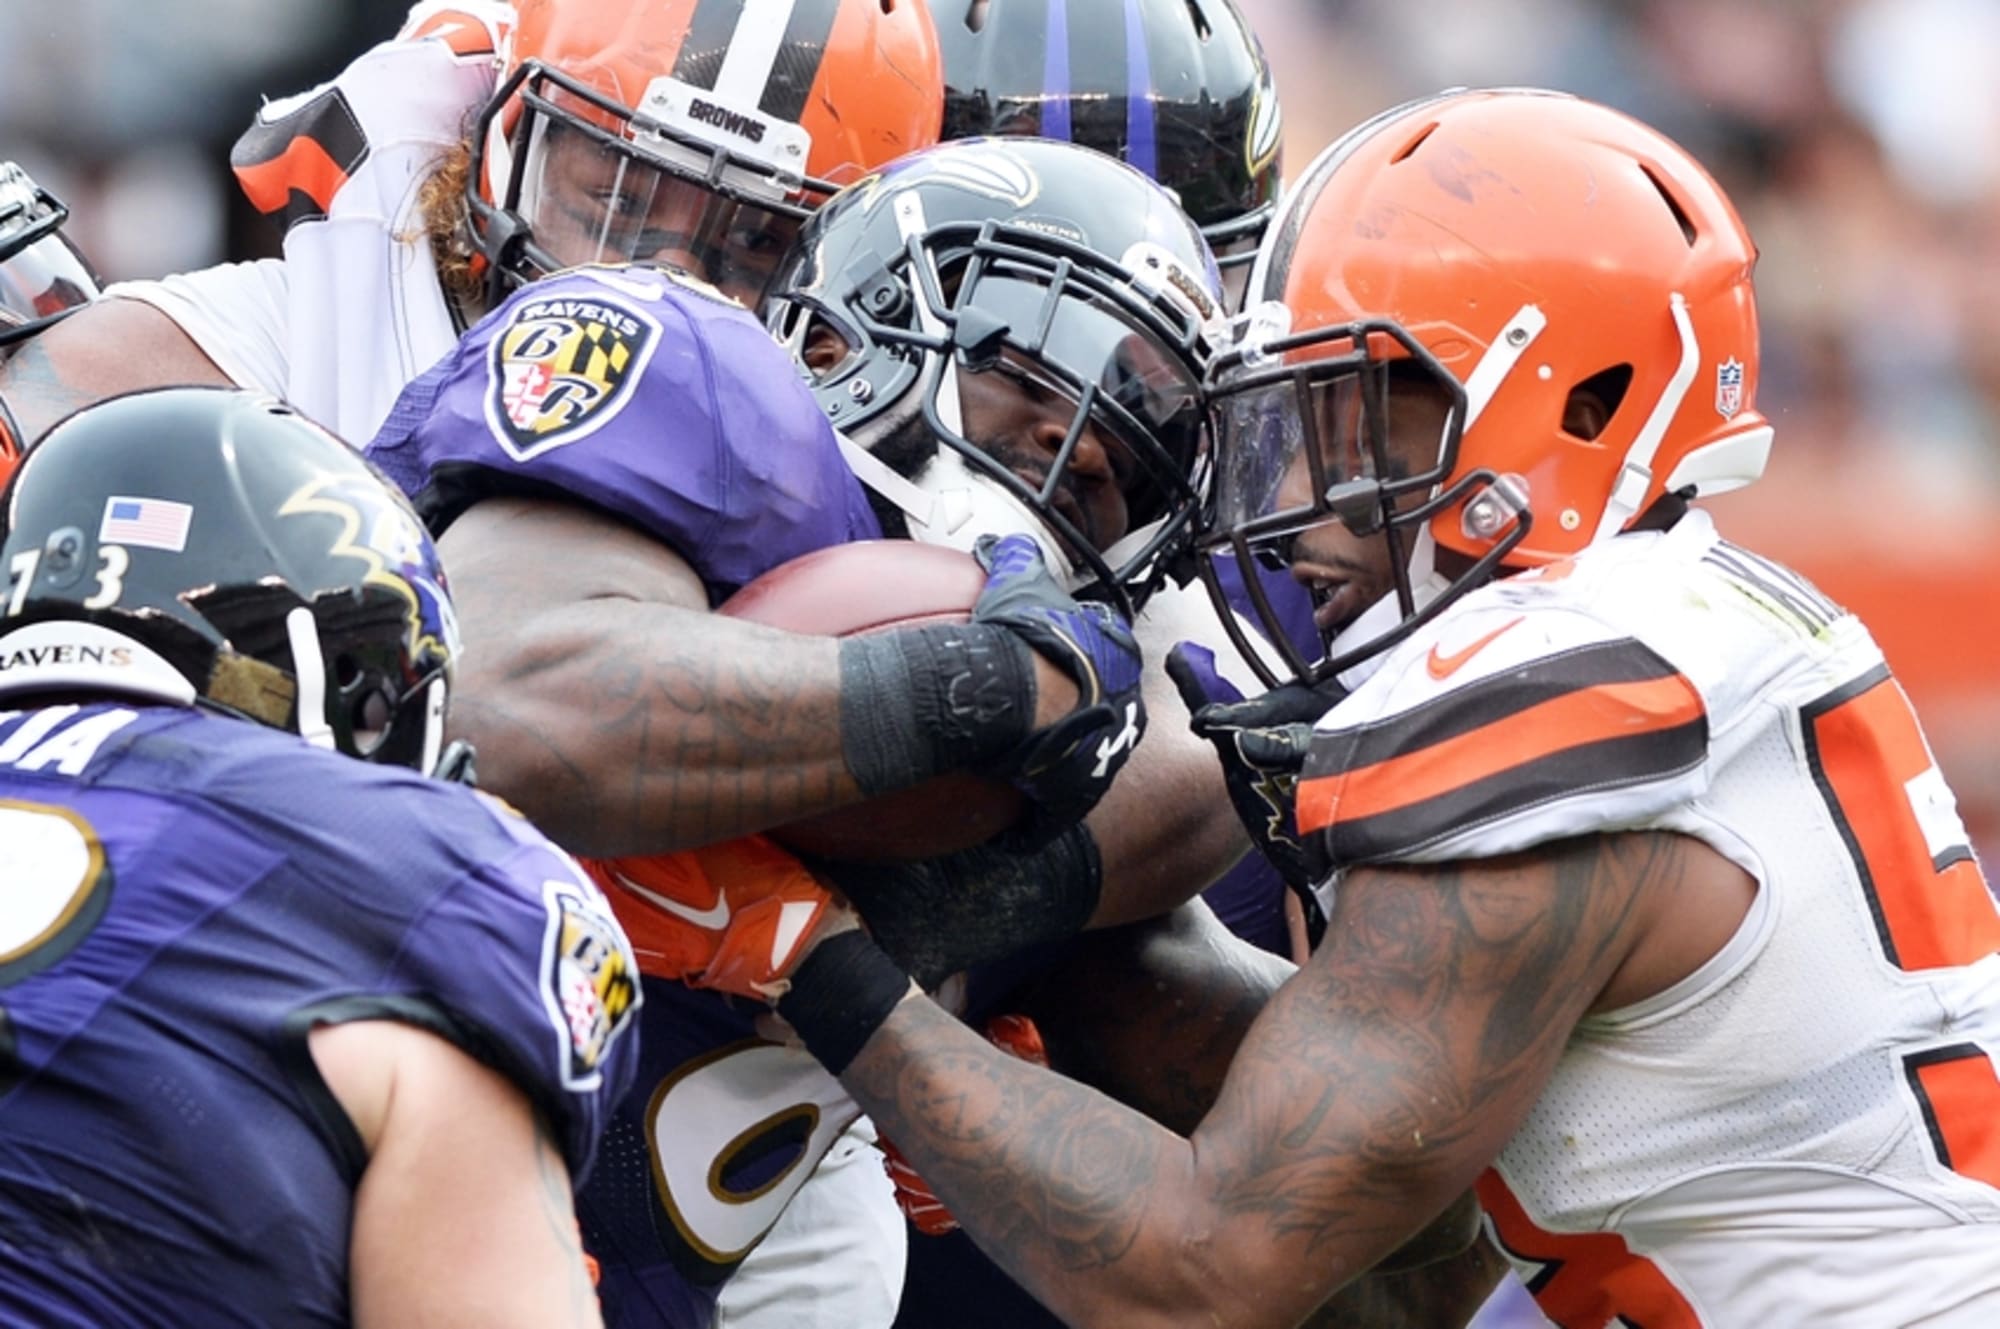 Cleveland Browns vs. Baltimore Ravens How to watch, listen to the game